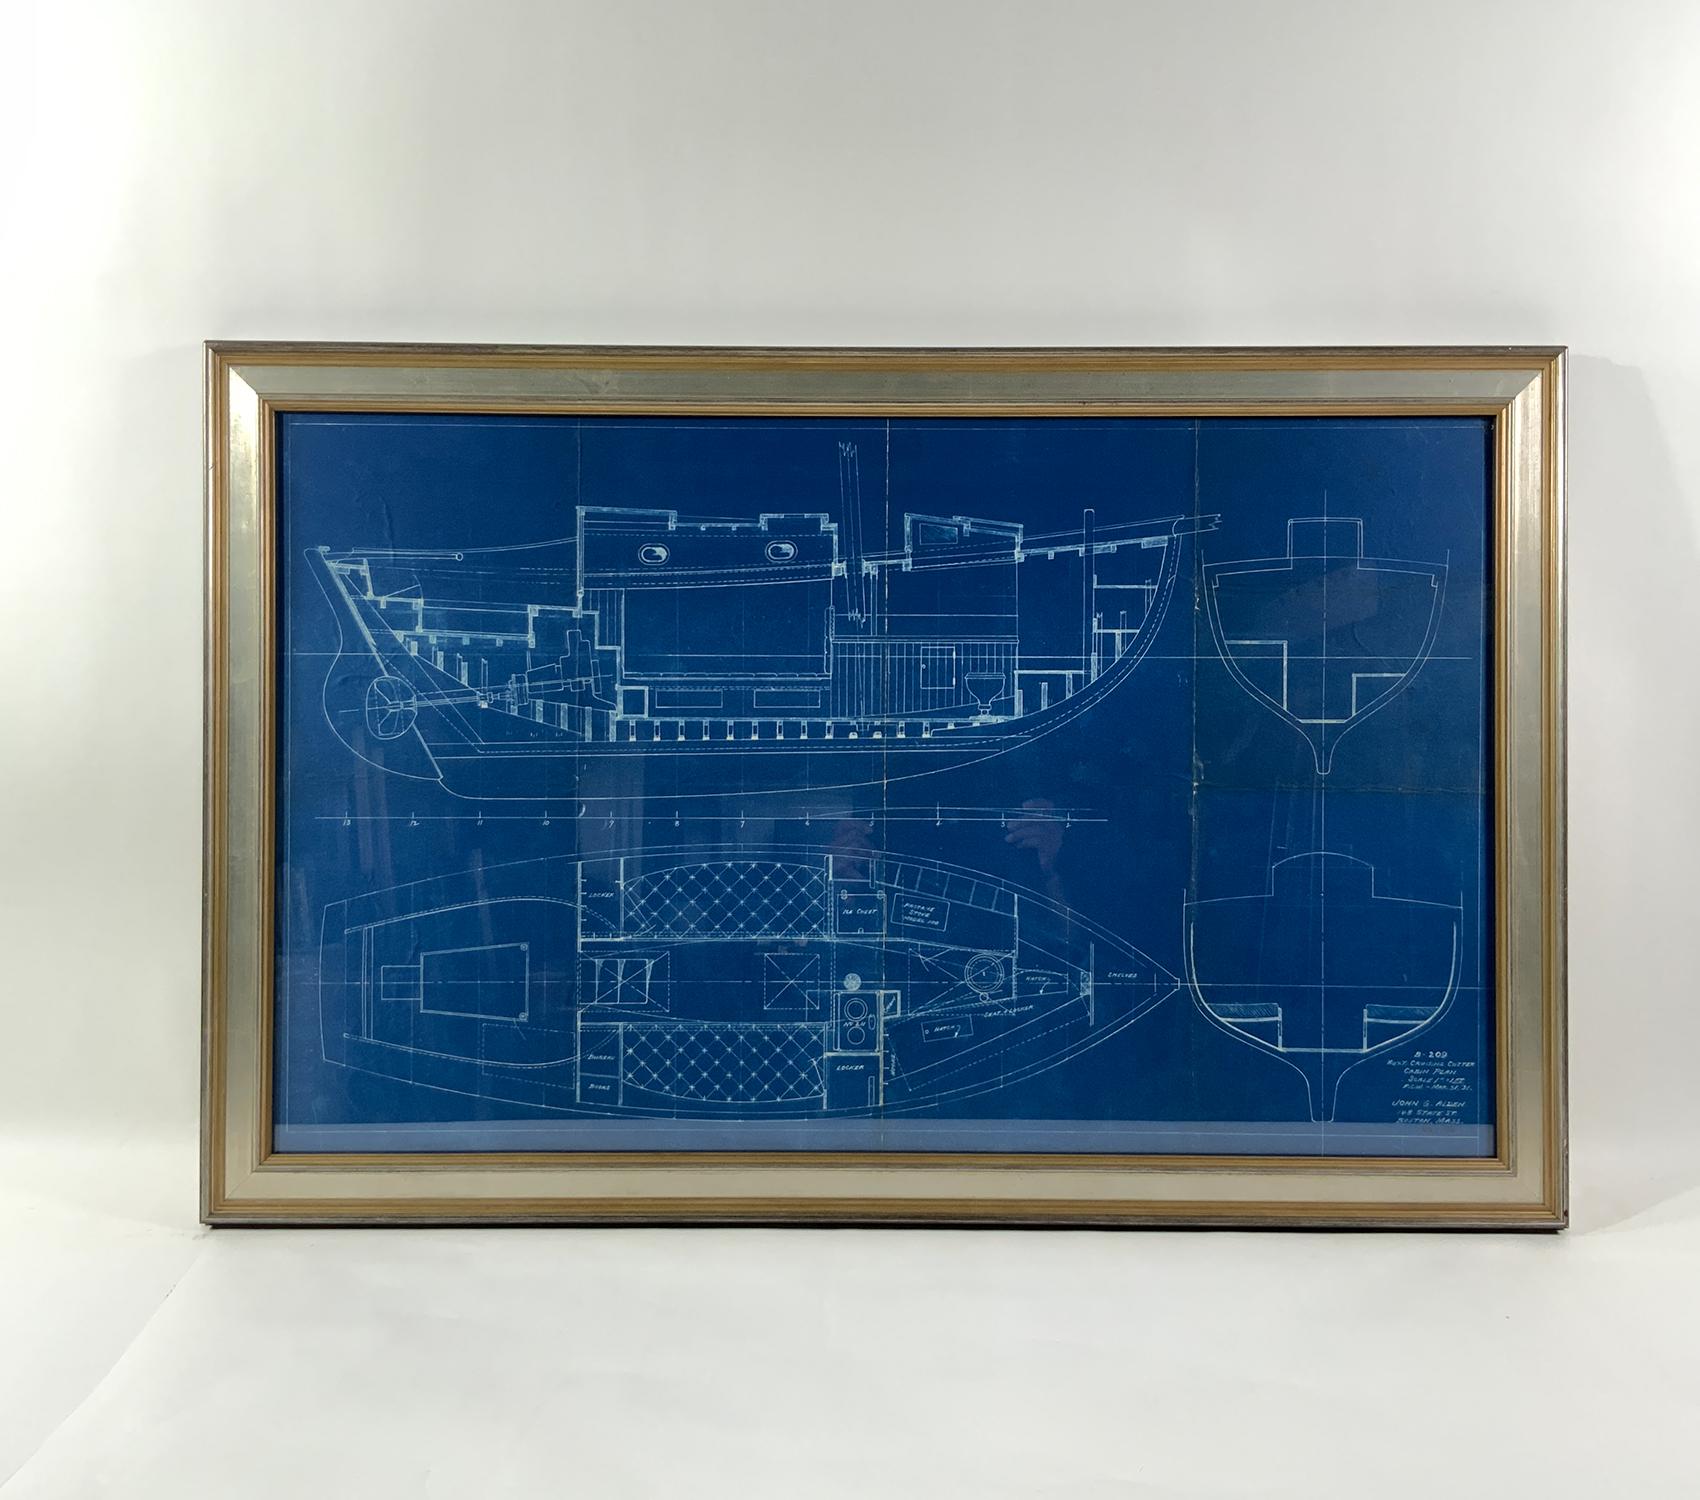 Detailed original blueprint for Project 209 from John G Alden, Naval Architect, 148 State St., Boston. This is a cabin plan for an auxiliary cruising cutter. Scale is 1 inch = 1 foot. Dated March 31, 1931. This vessel was built for the American